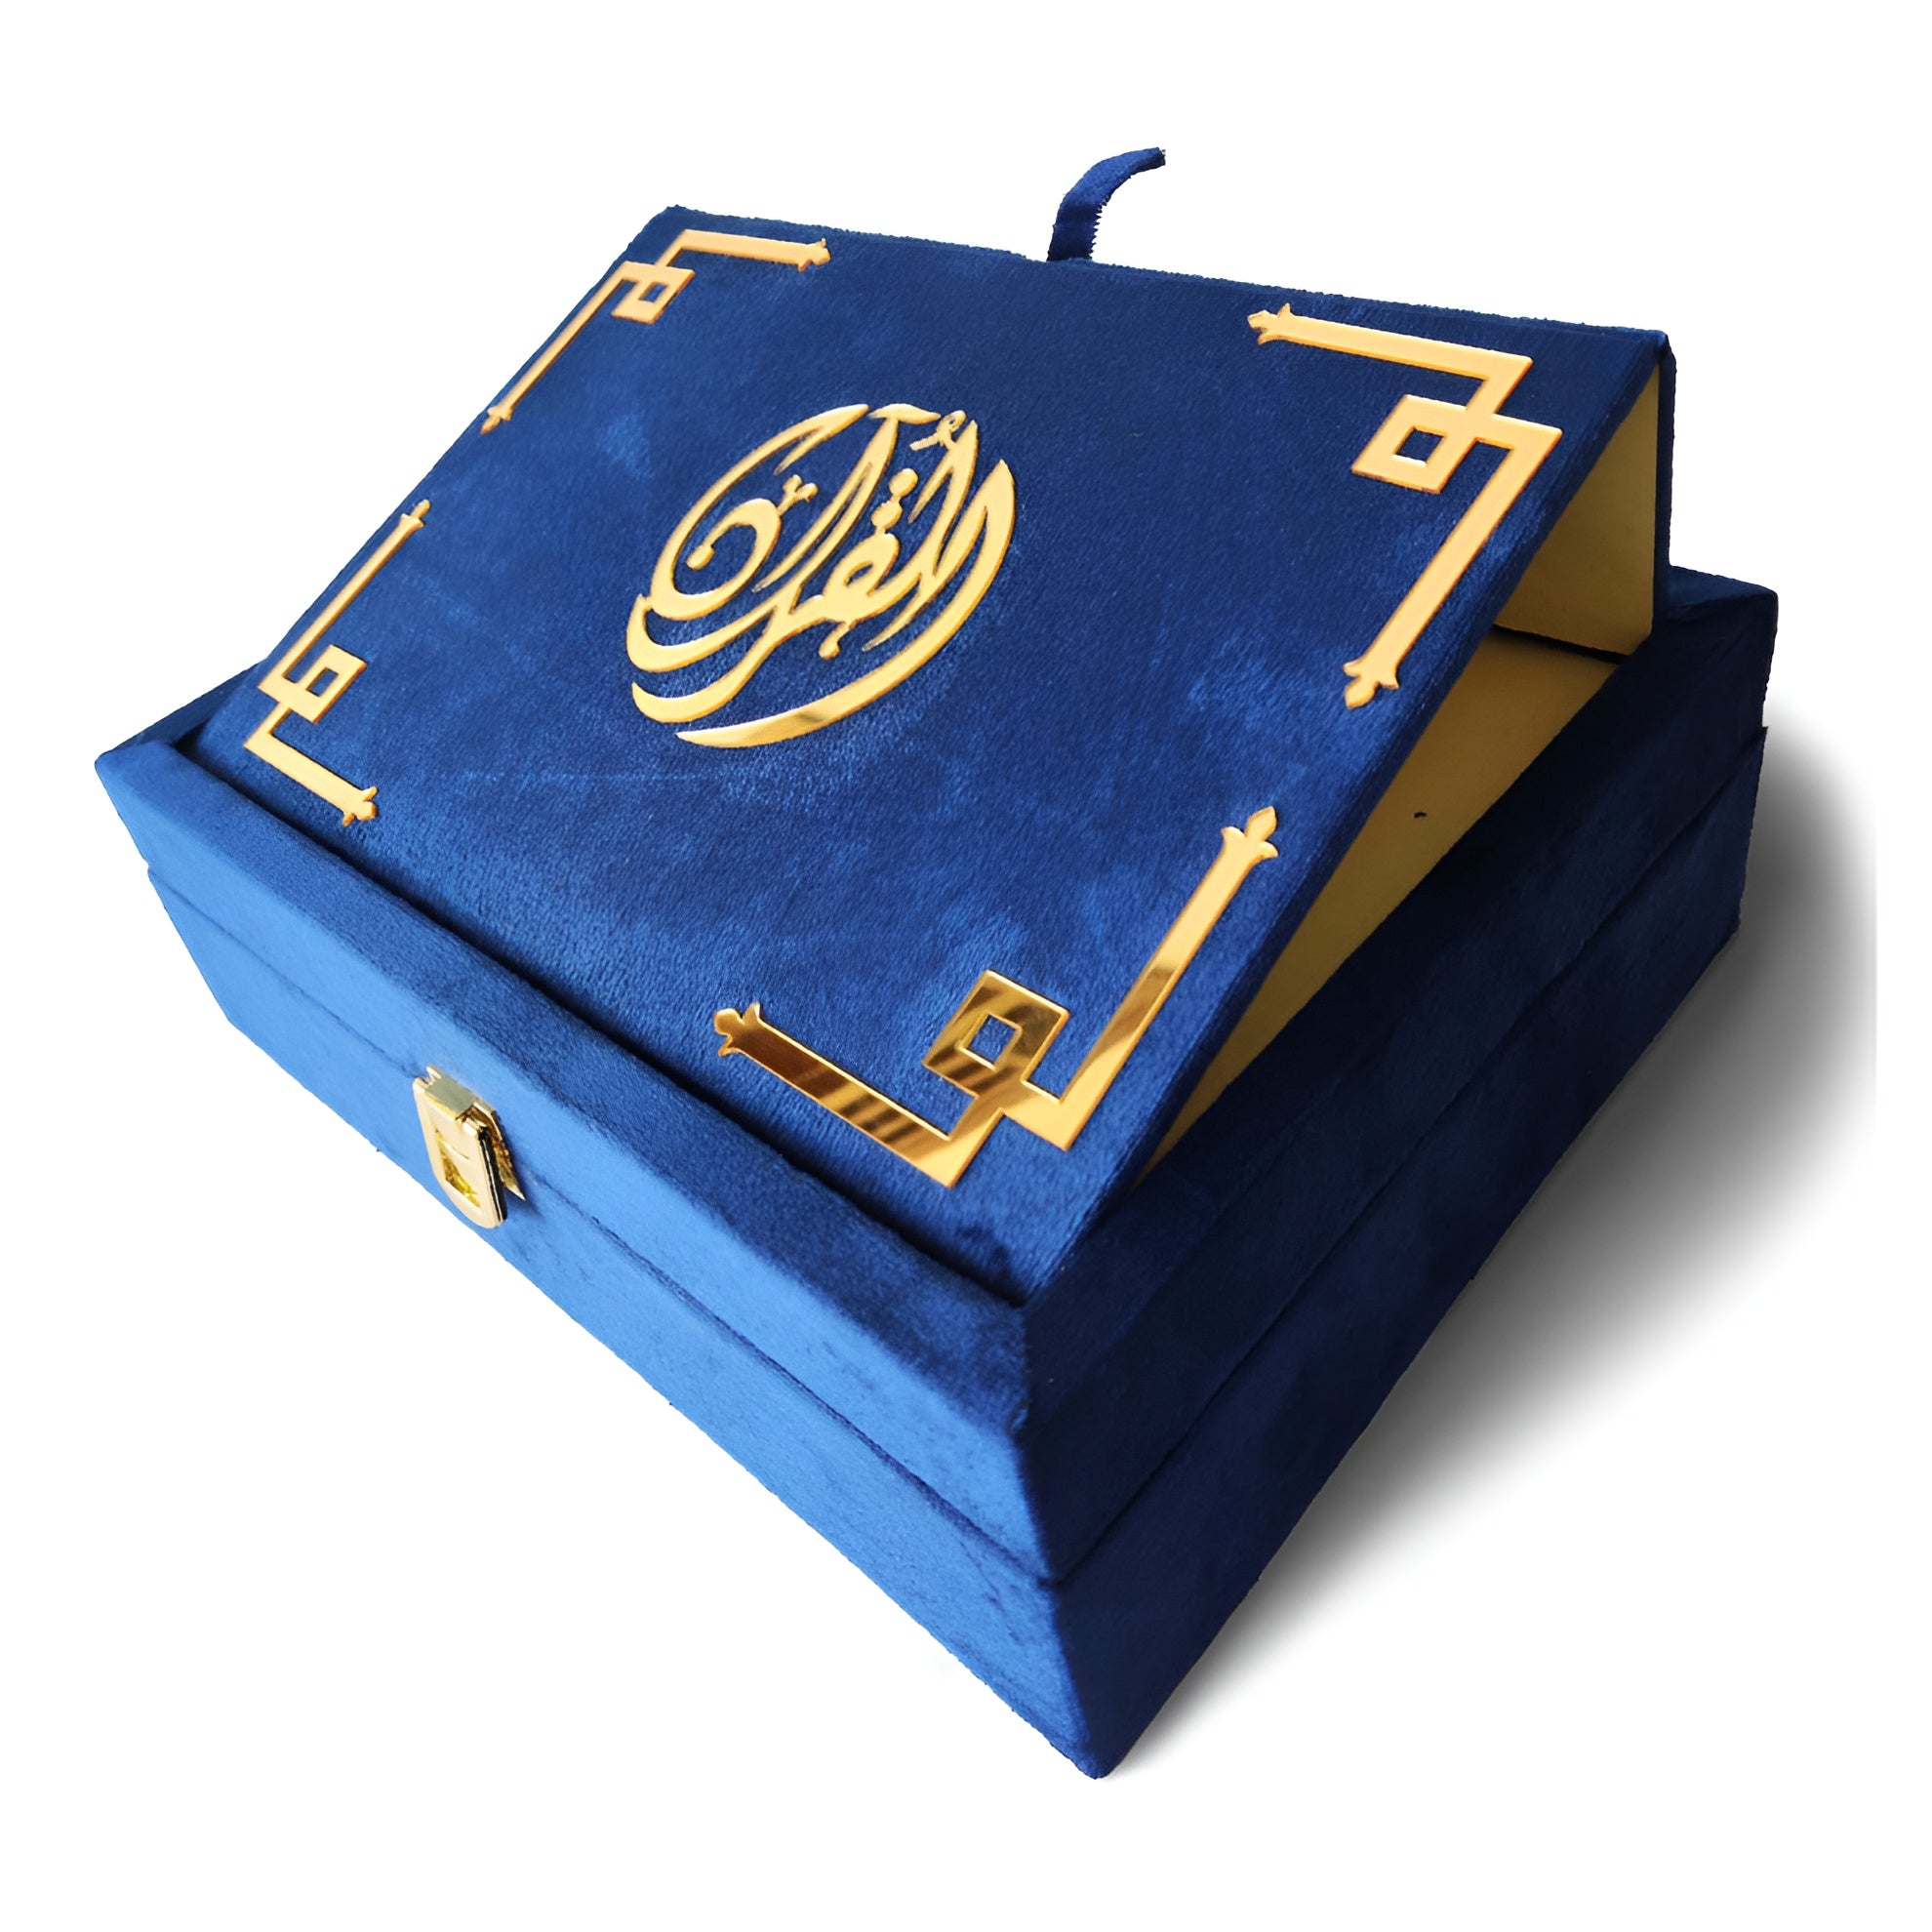 GALACTIC GLOW VELVET QURAN SET (WITH BOX STAND)